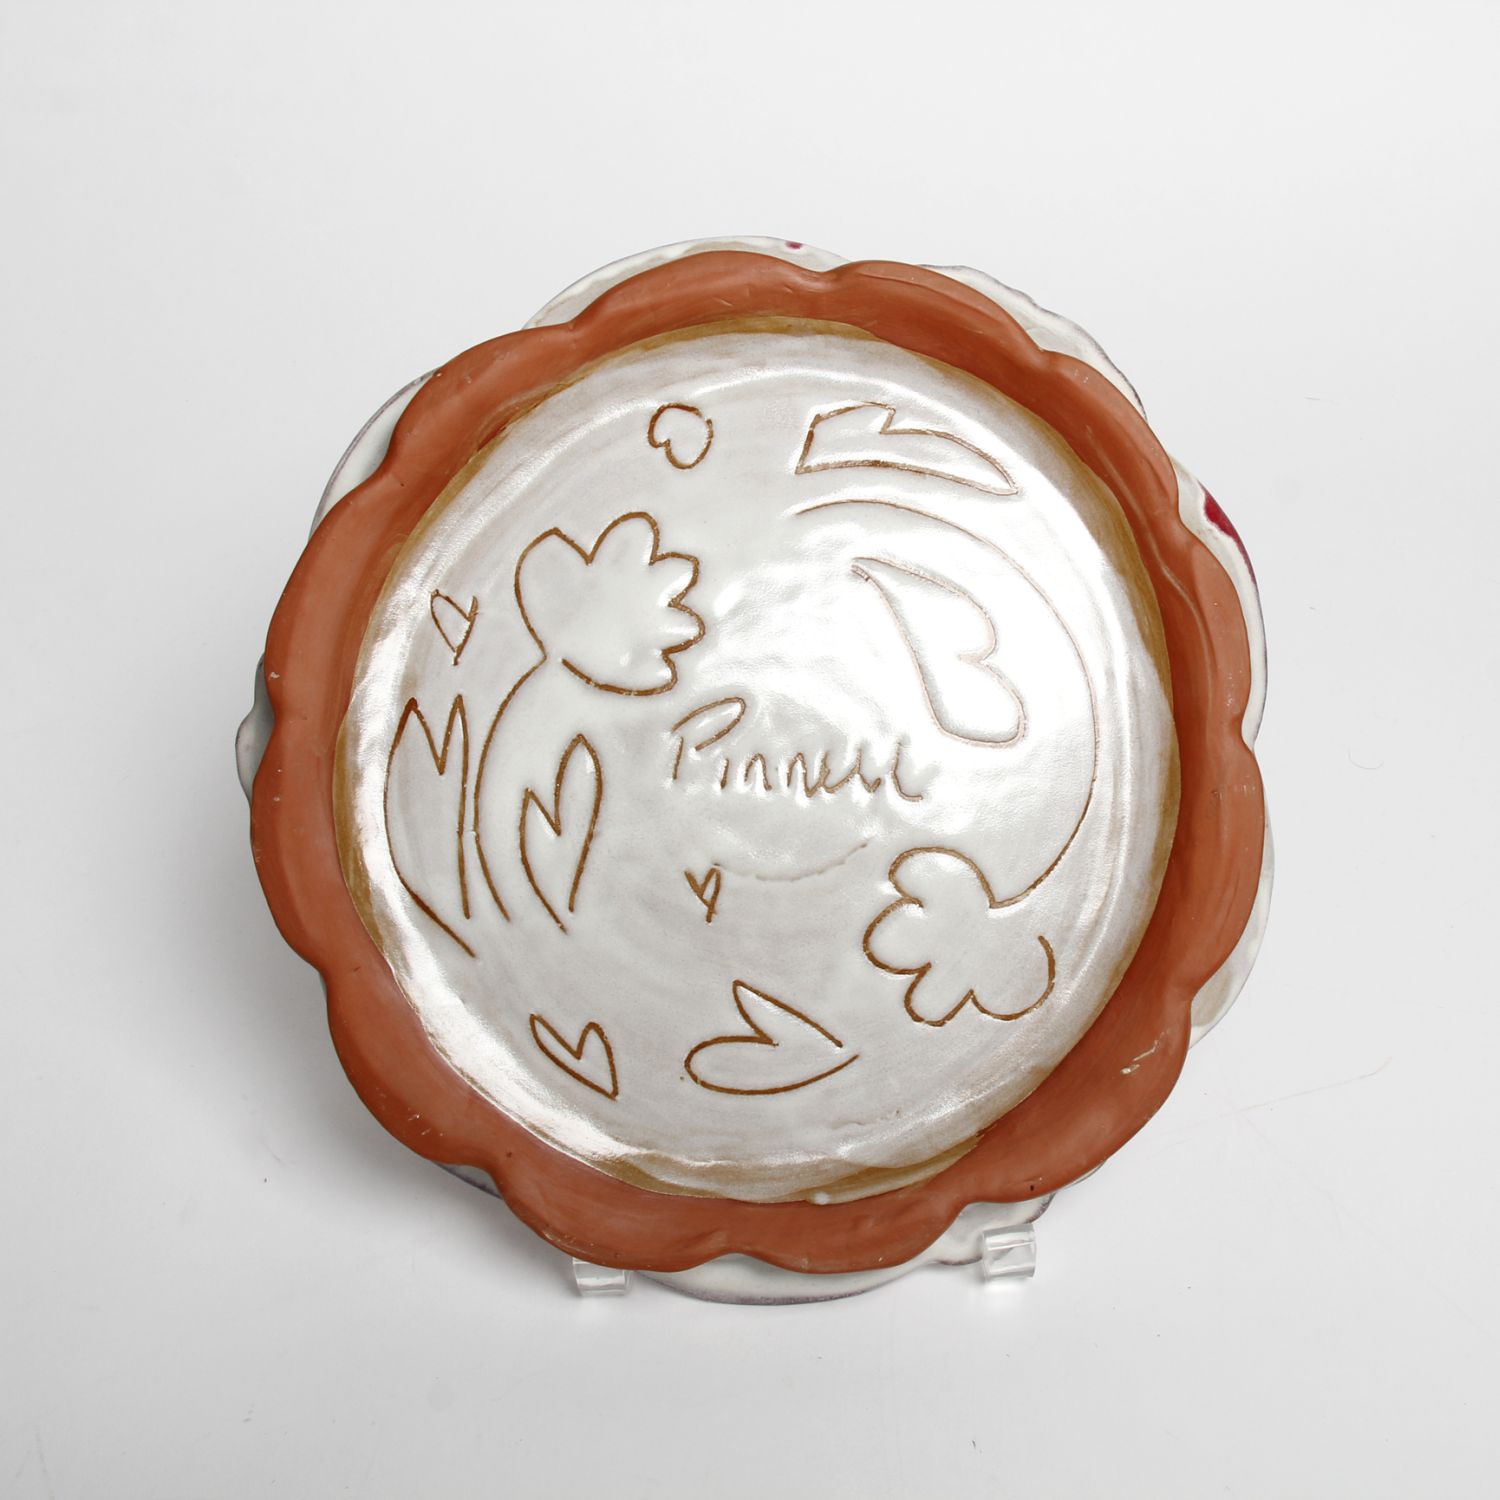 Zoe Pinnell: Swan plate Product Image 2 of 2